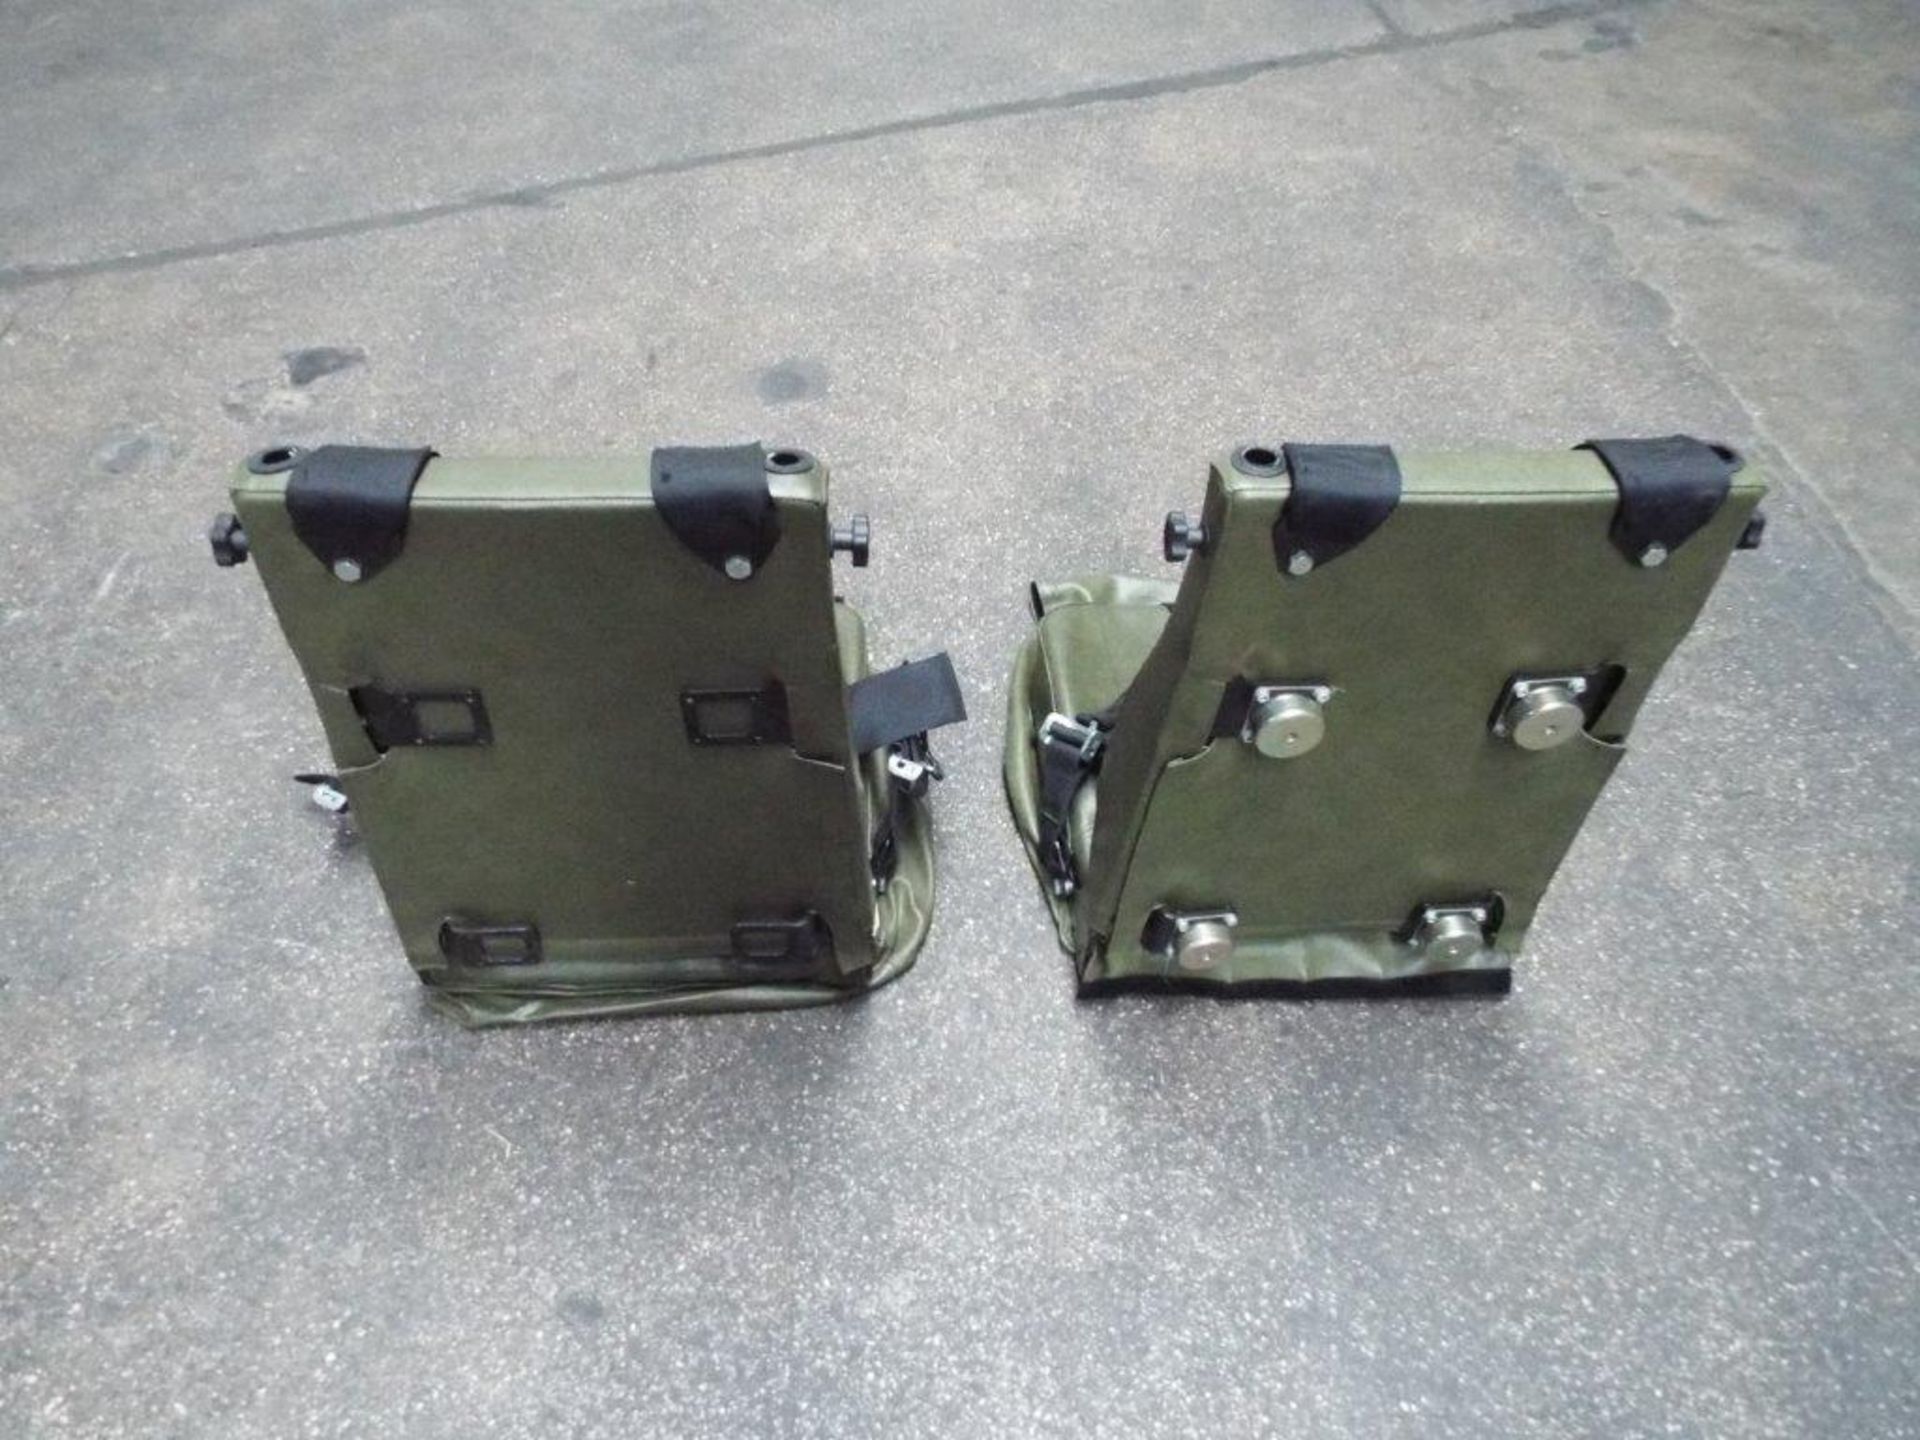 2 x Unissued Vehicle Operators Seats with Harness - Image 4 of 6